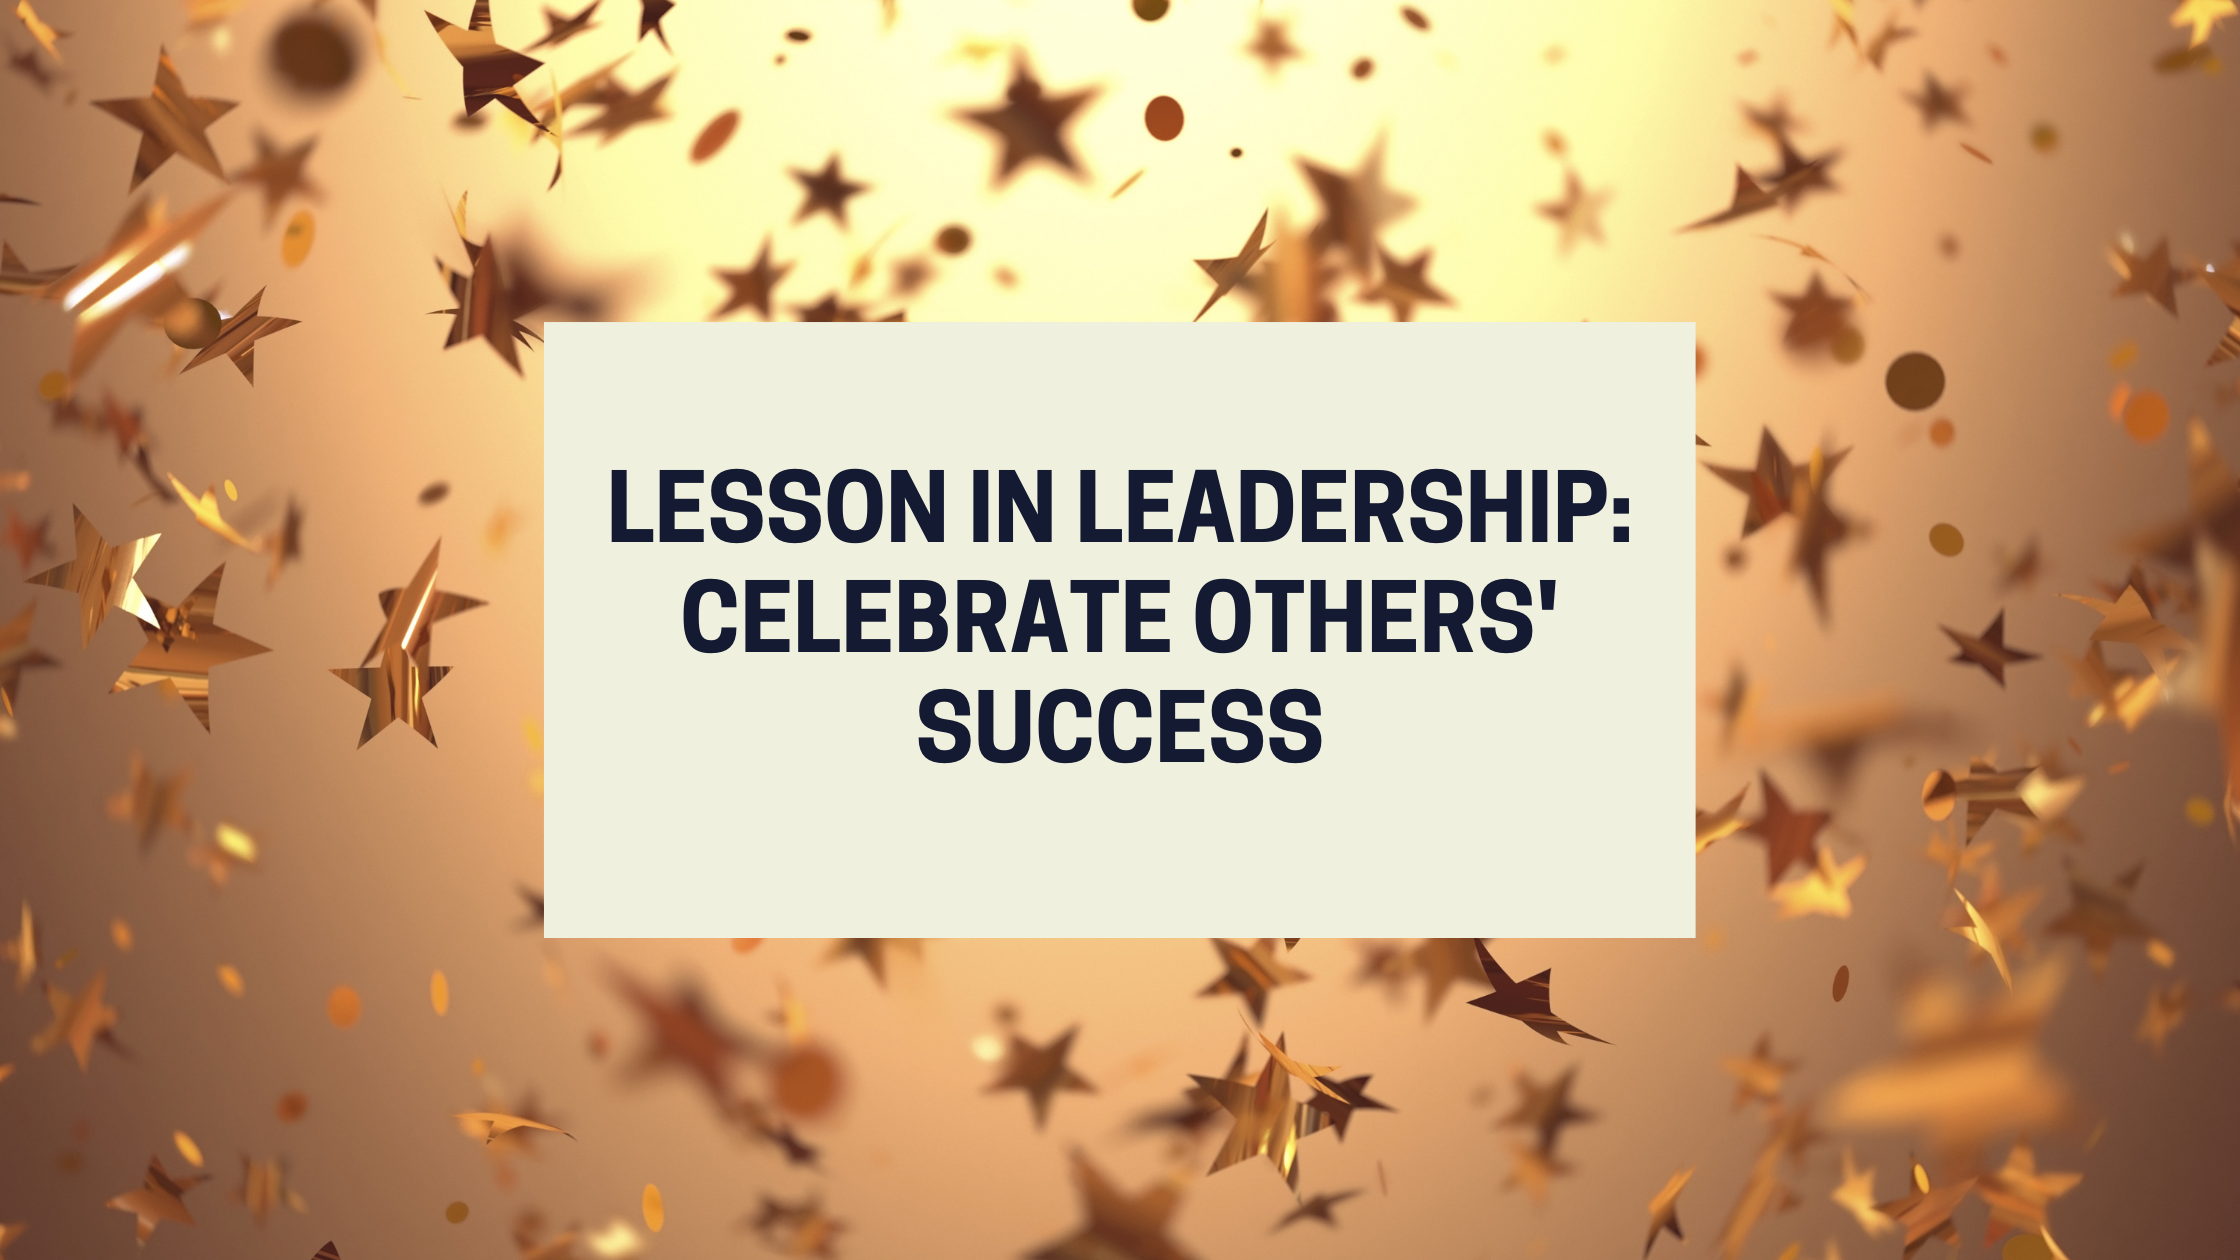 leadership lesson: celebrate others success